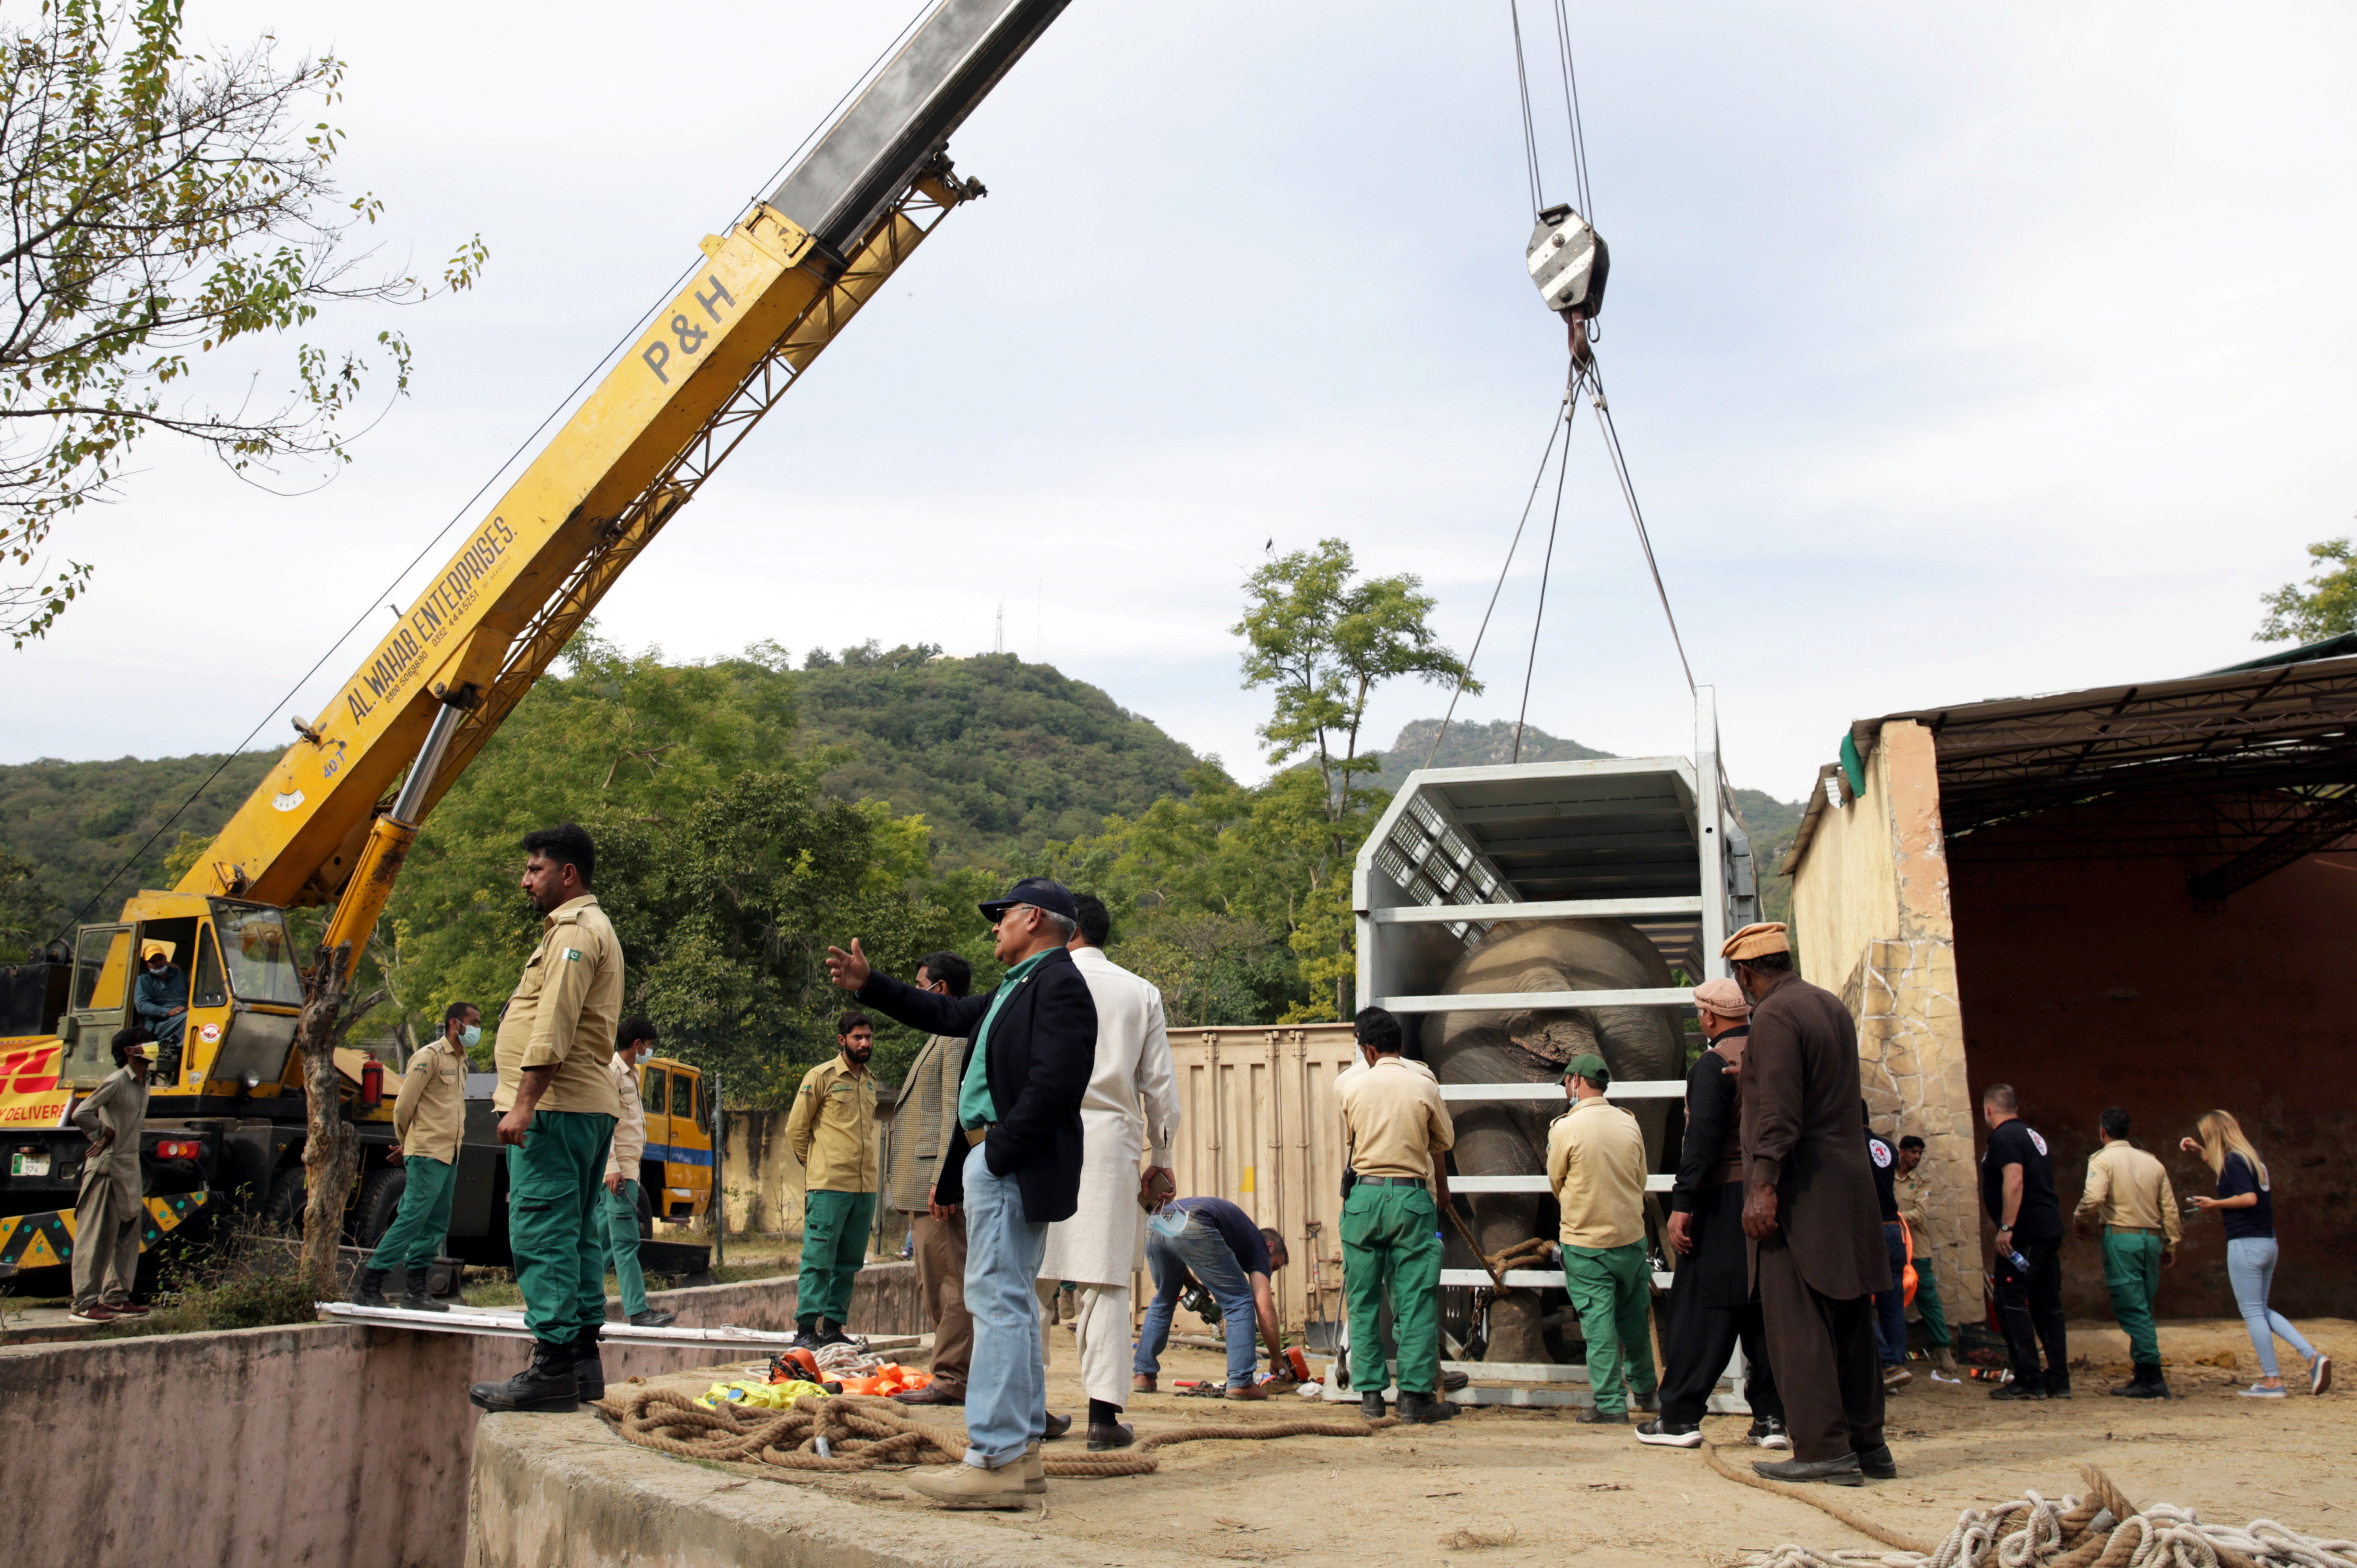 Animal experts gather as a crane lifts up a crate carrying Kaavan, an elephant to be transported to a sanctuary in Cambodia.